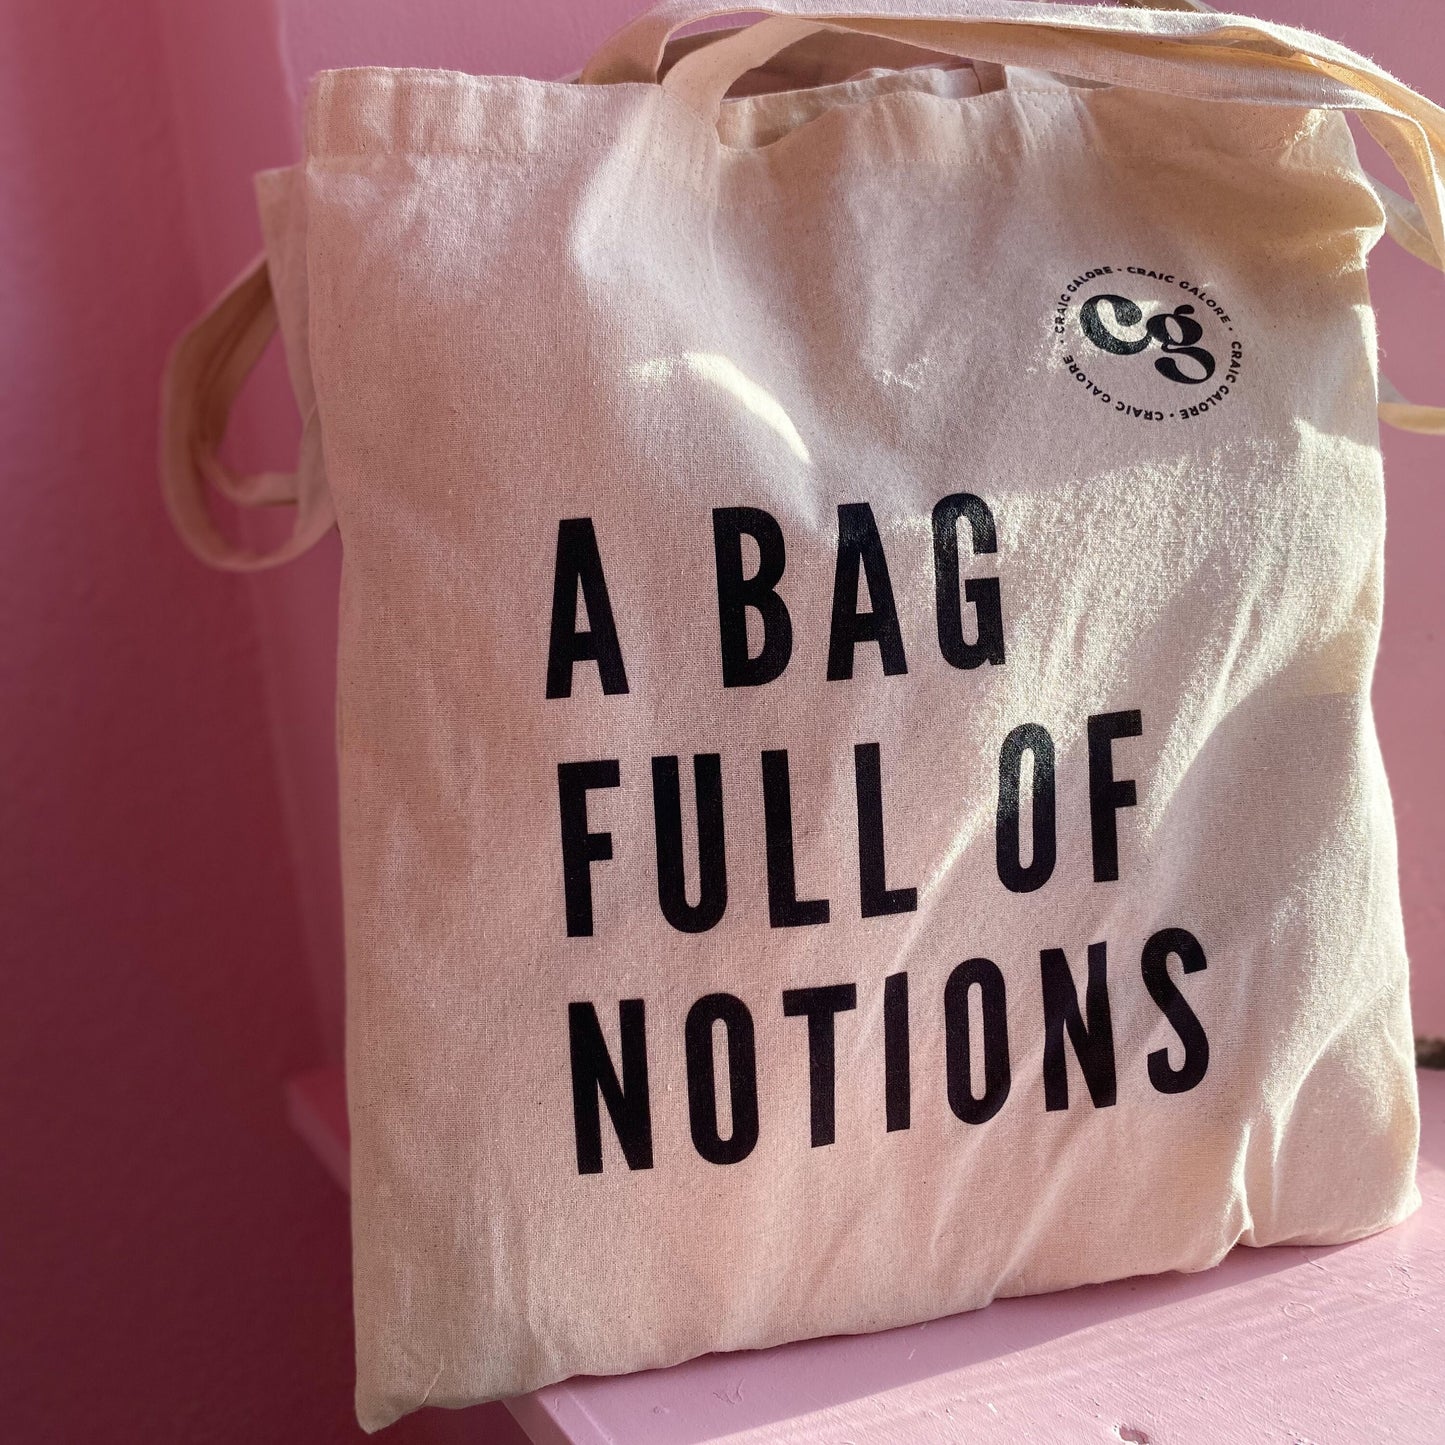 A bag full of notions